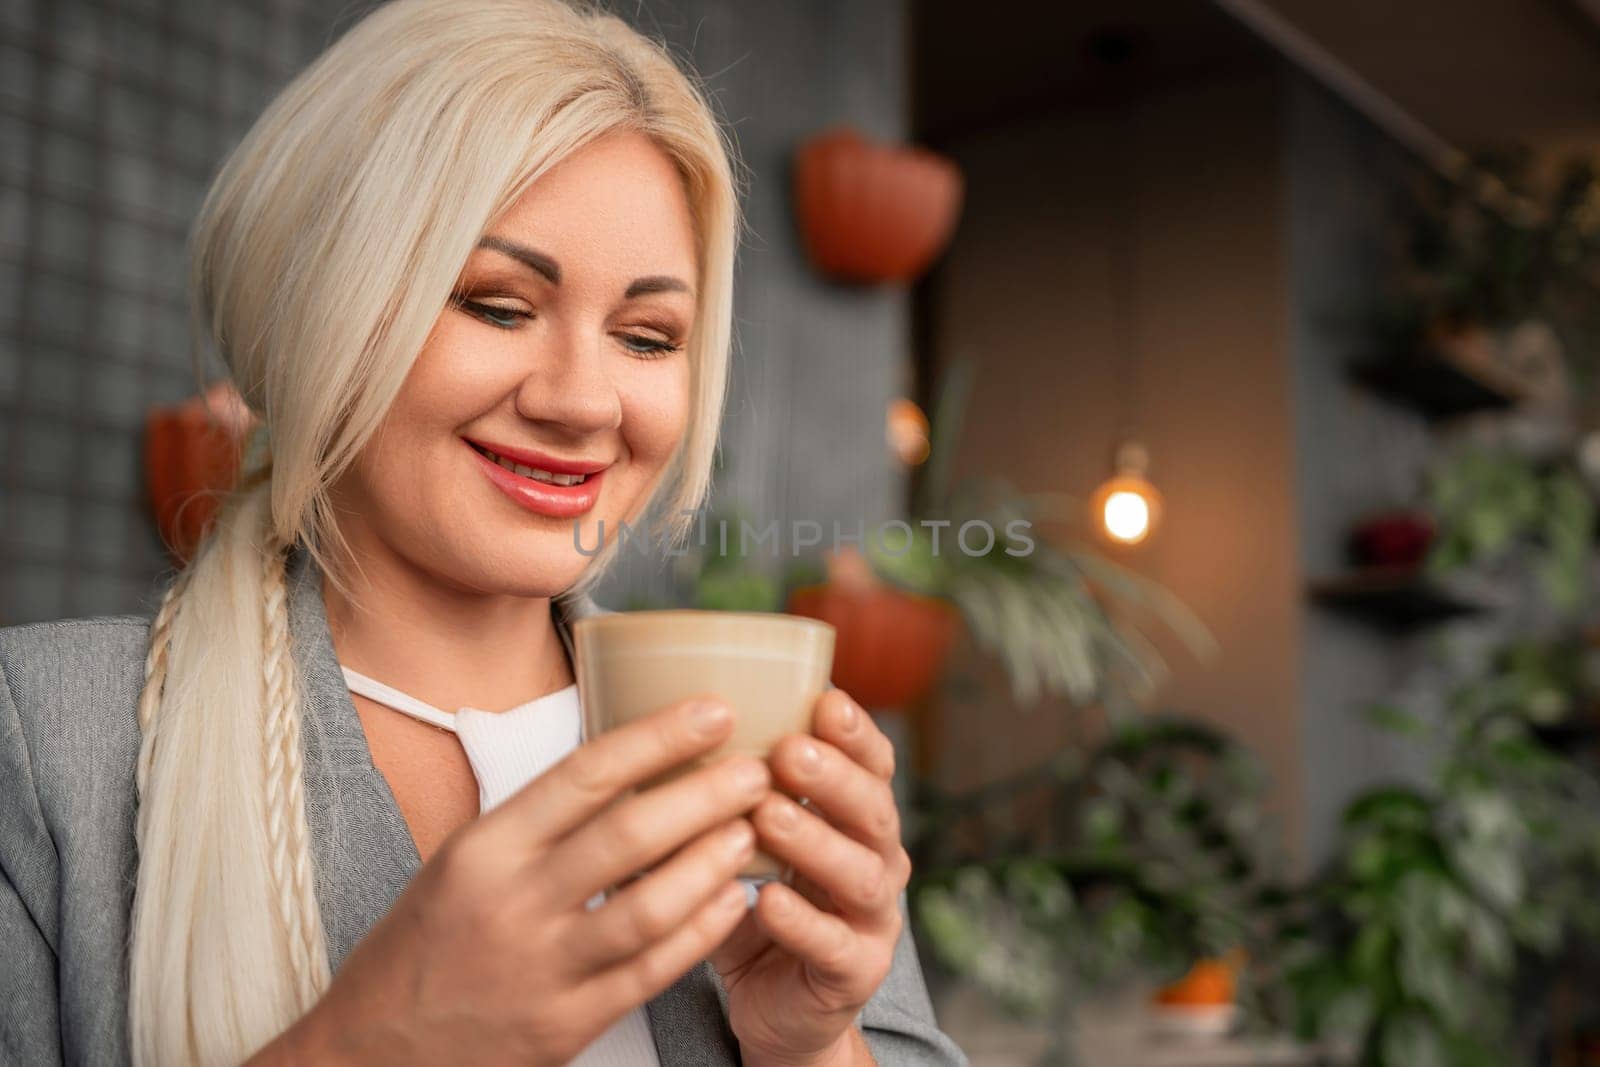 A blonde woman is holding a cup of coffee and smiling. The scene is set in a room with plants and a potted plant in the background. by Matiunina